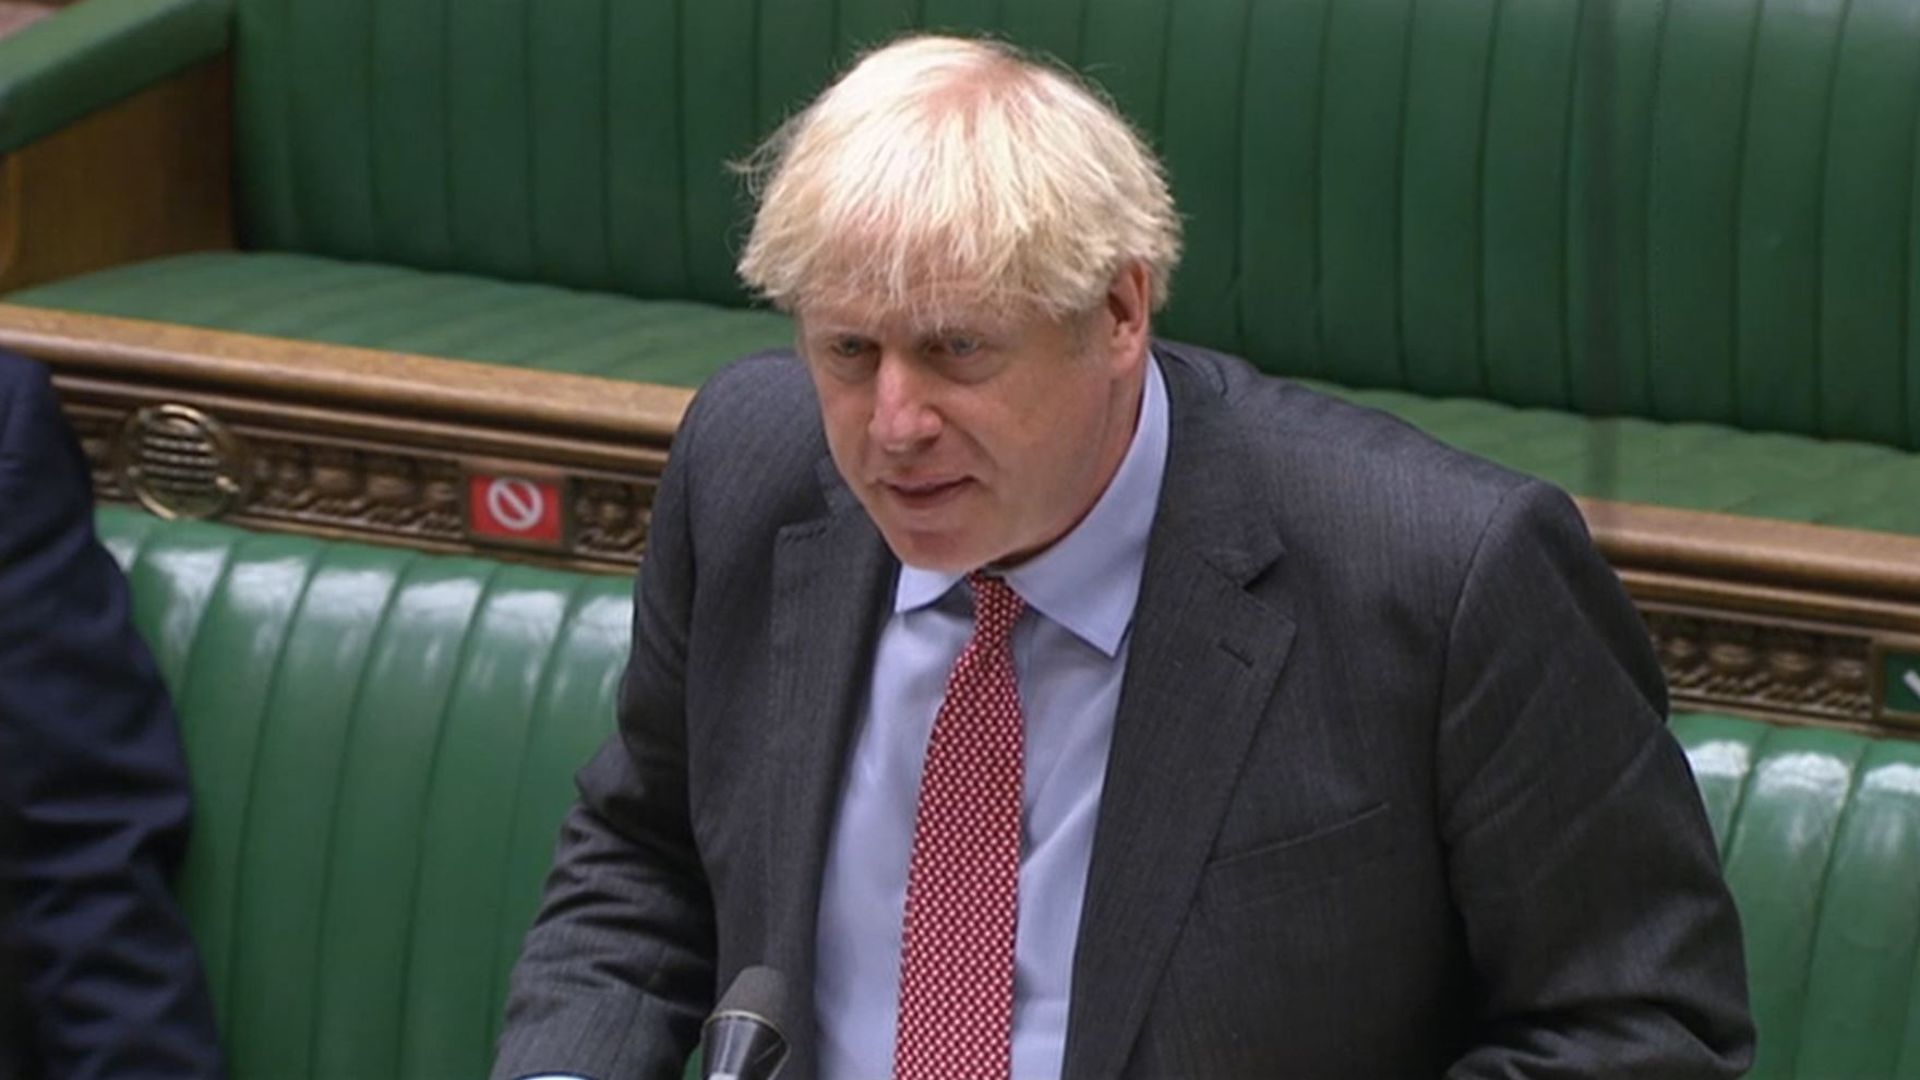 Prime Minister Boris Johnson speaks during Prime Minister's Questions in the House of Commons - Credit: PA